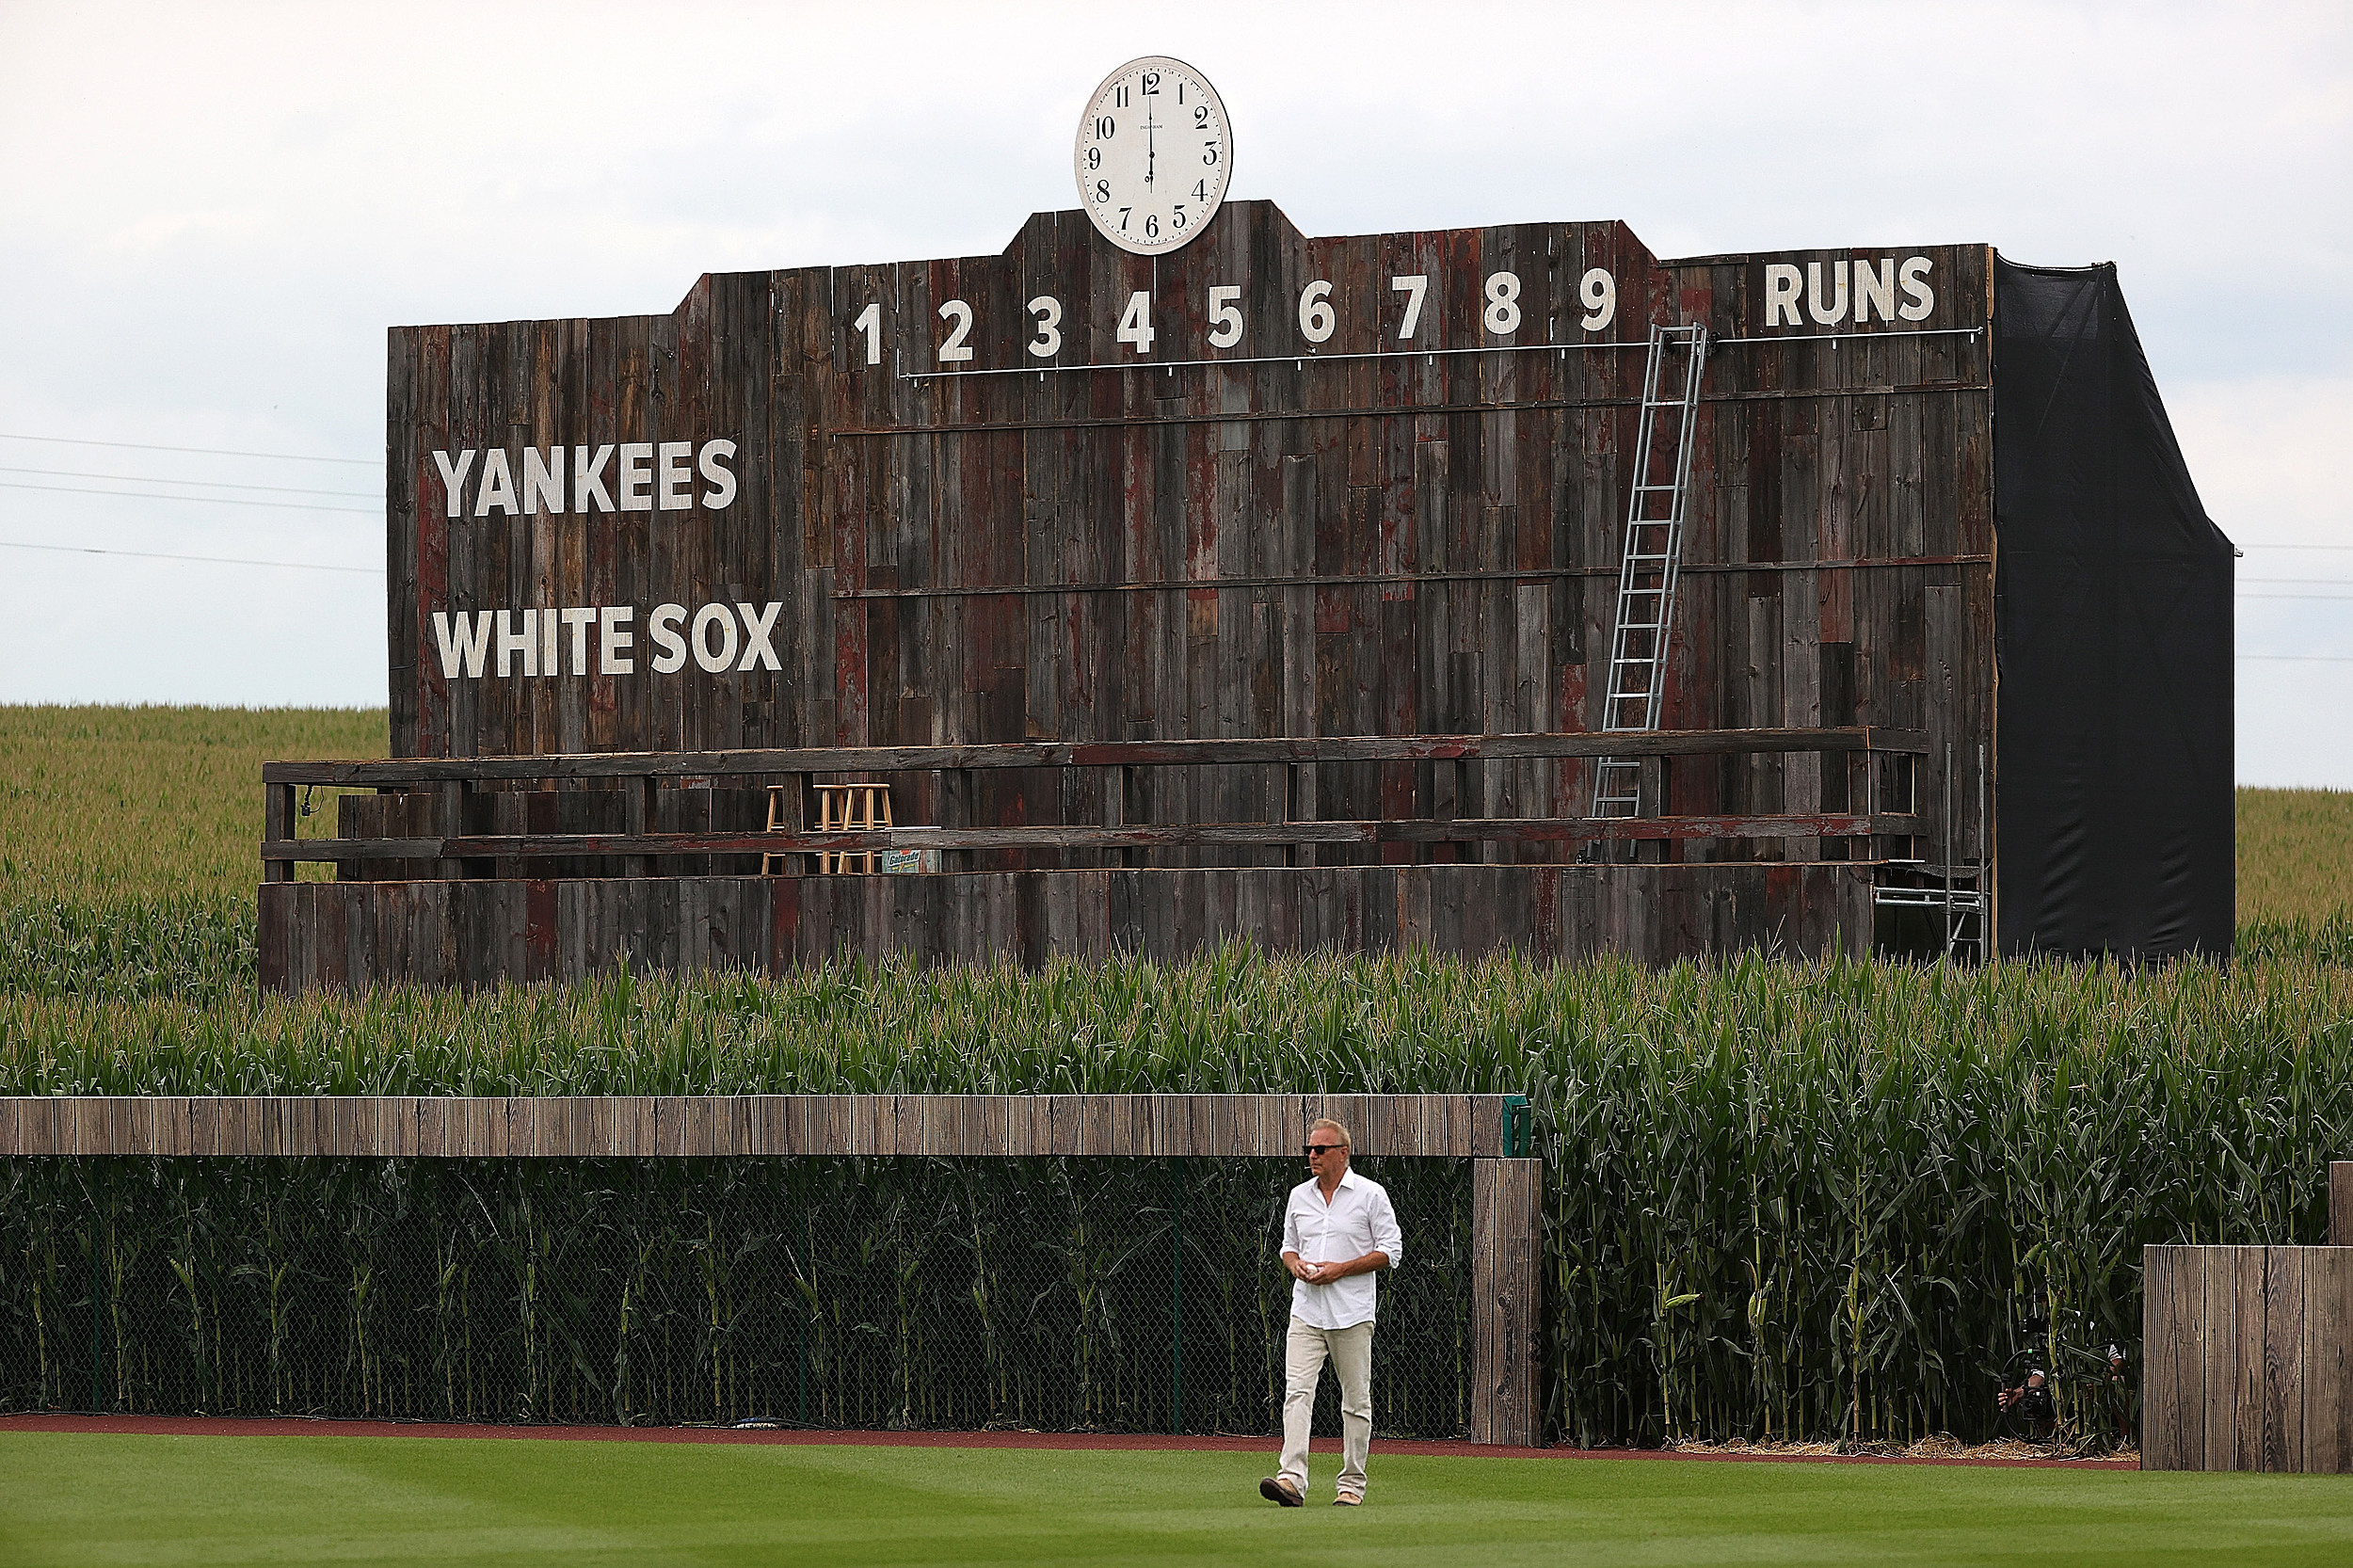 New plan for 'Field of Dreams' locale turns into nightmare for